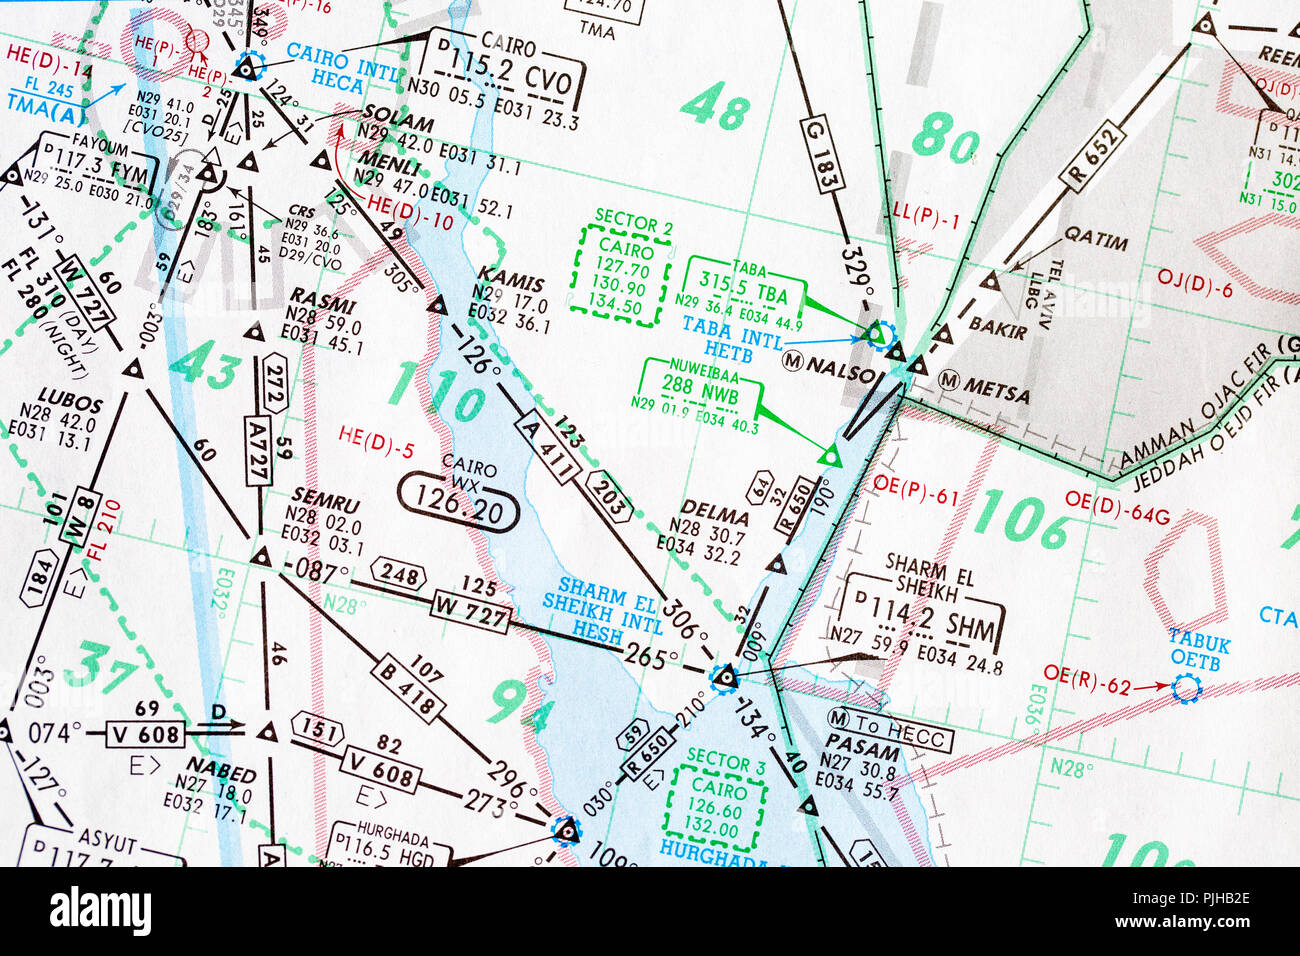 Detail of a commercial aviation pilot's flight map of the Middle East. Stock Photo